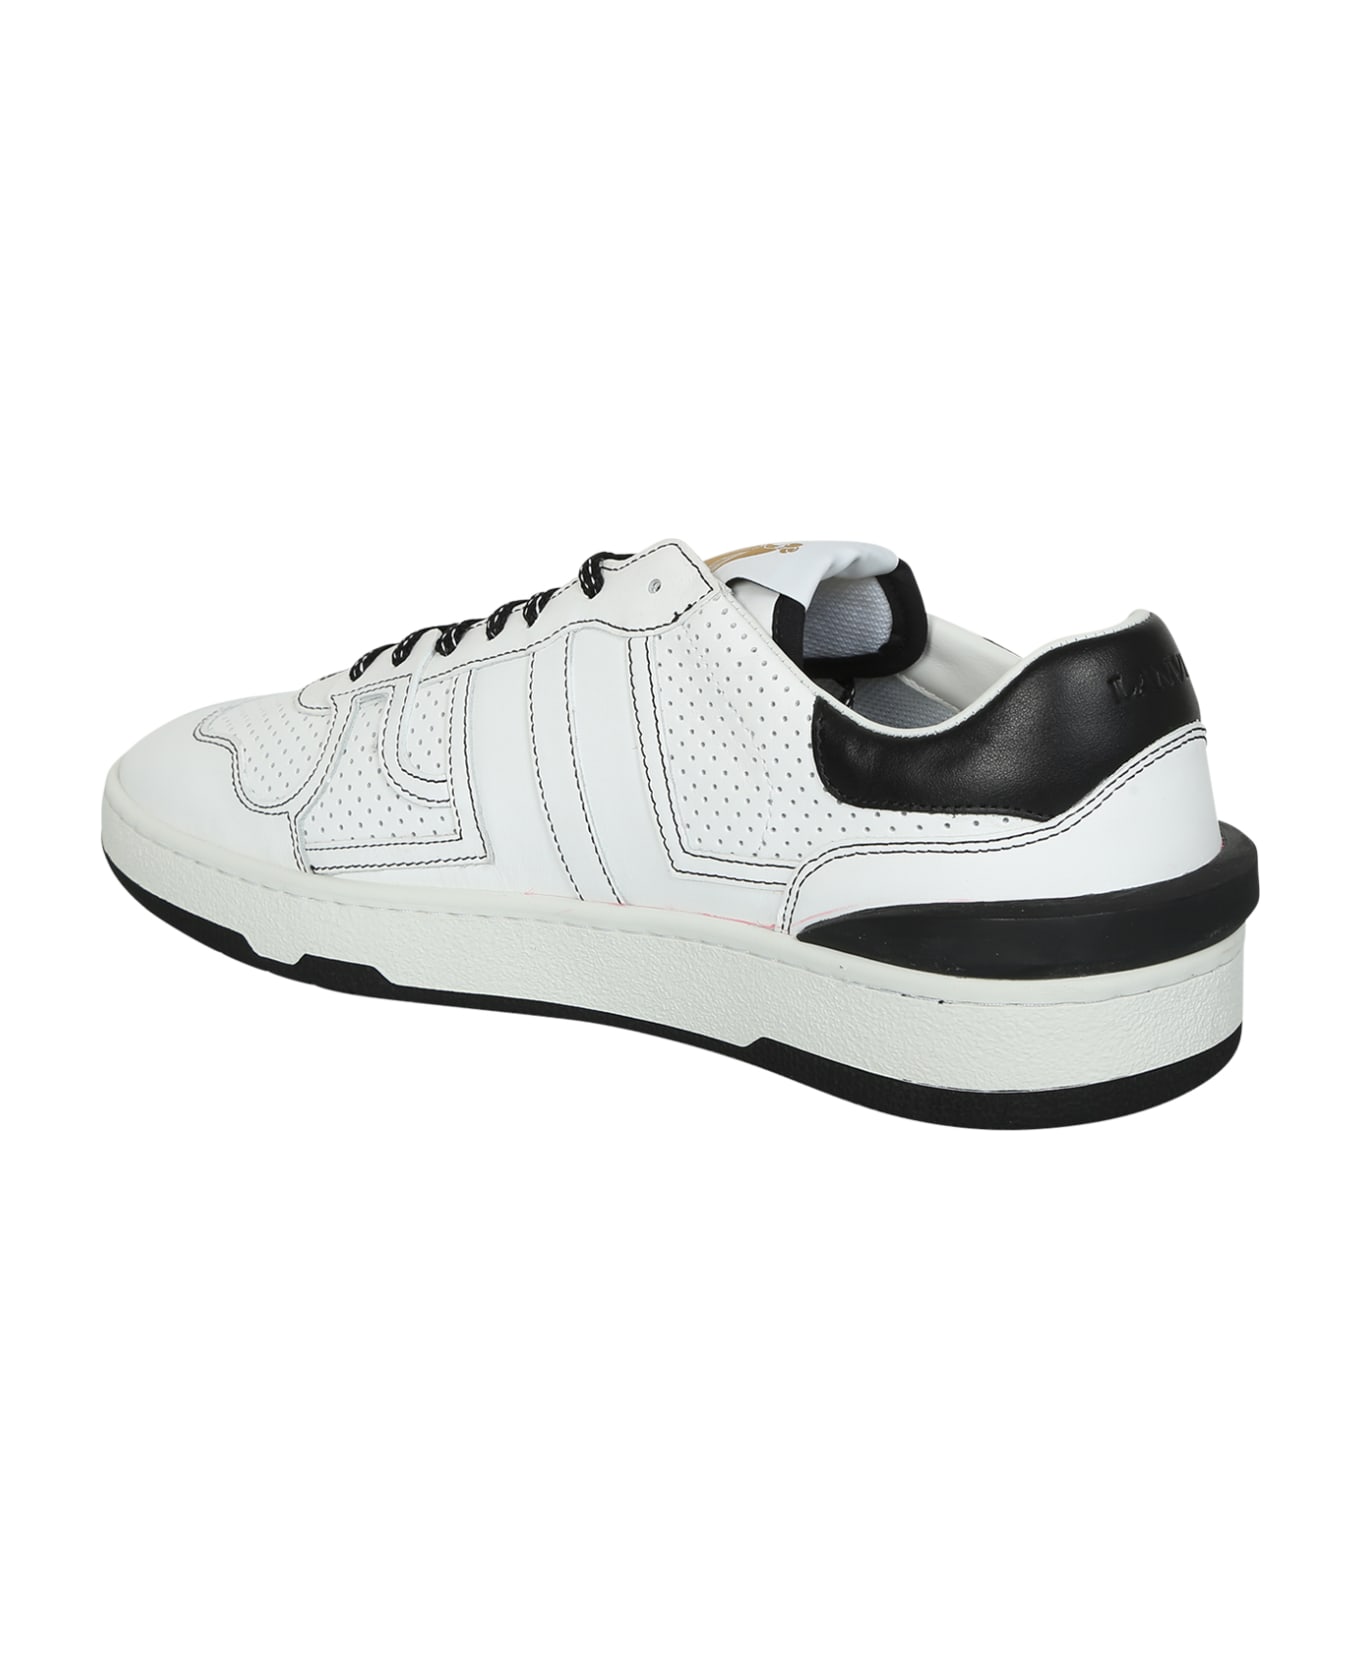 Lanvin Clay Perforated Panel Sneakers - White